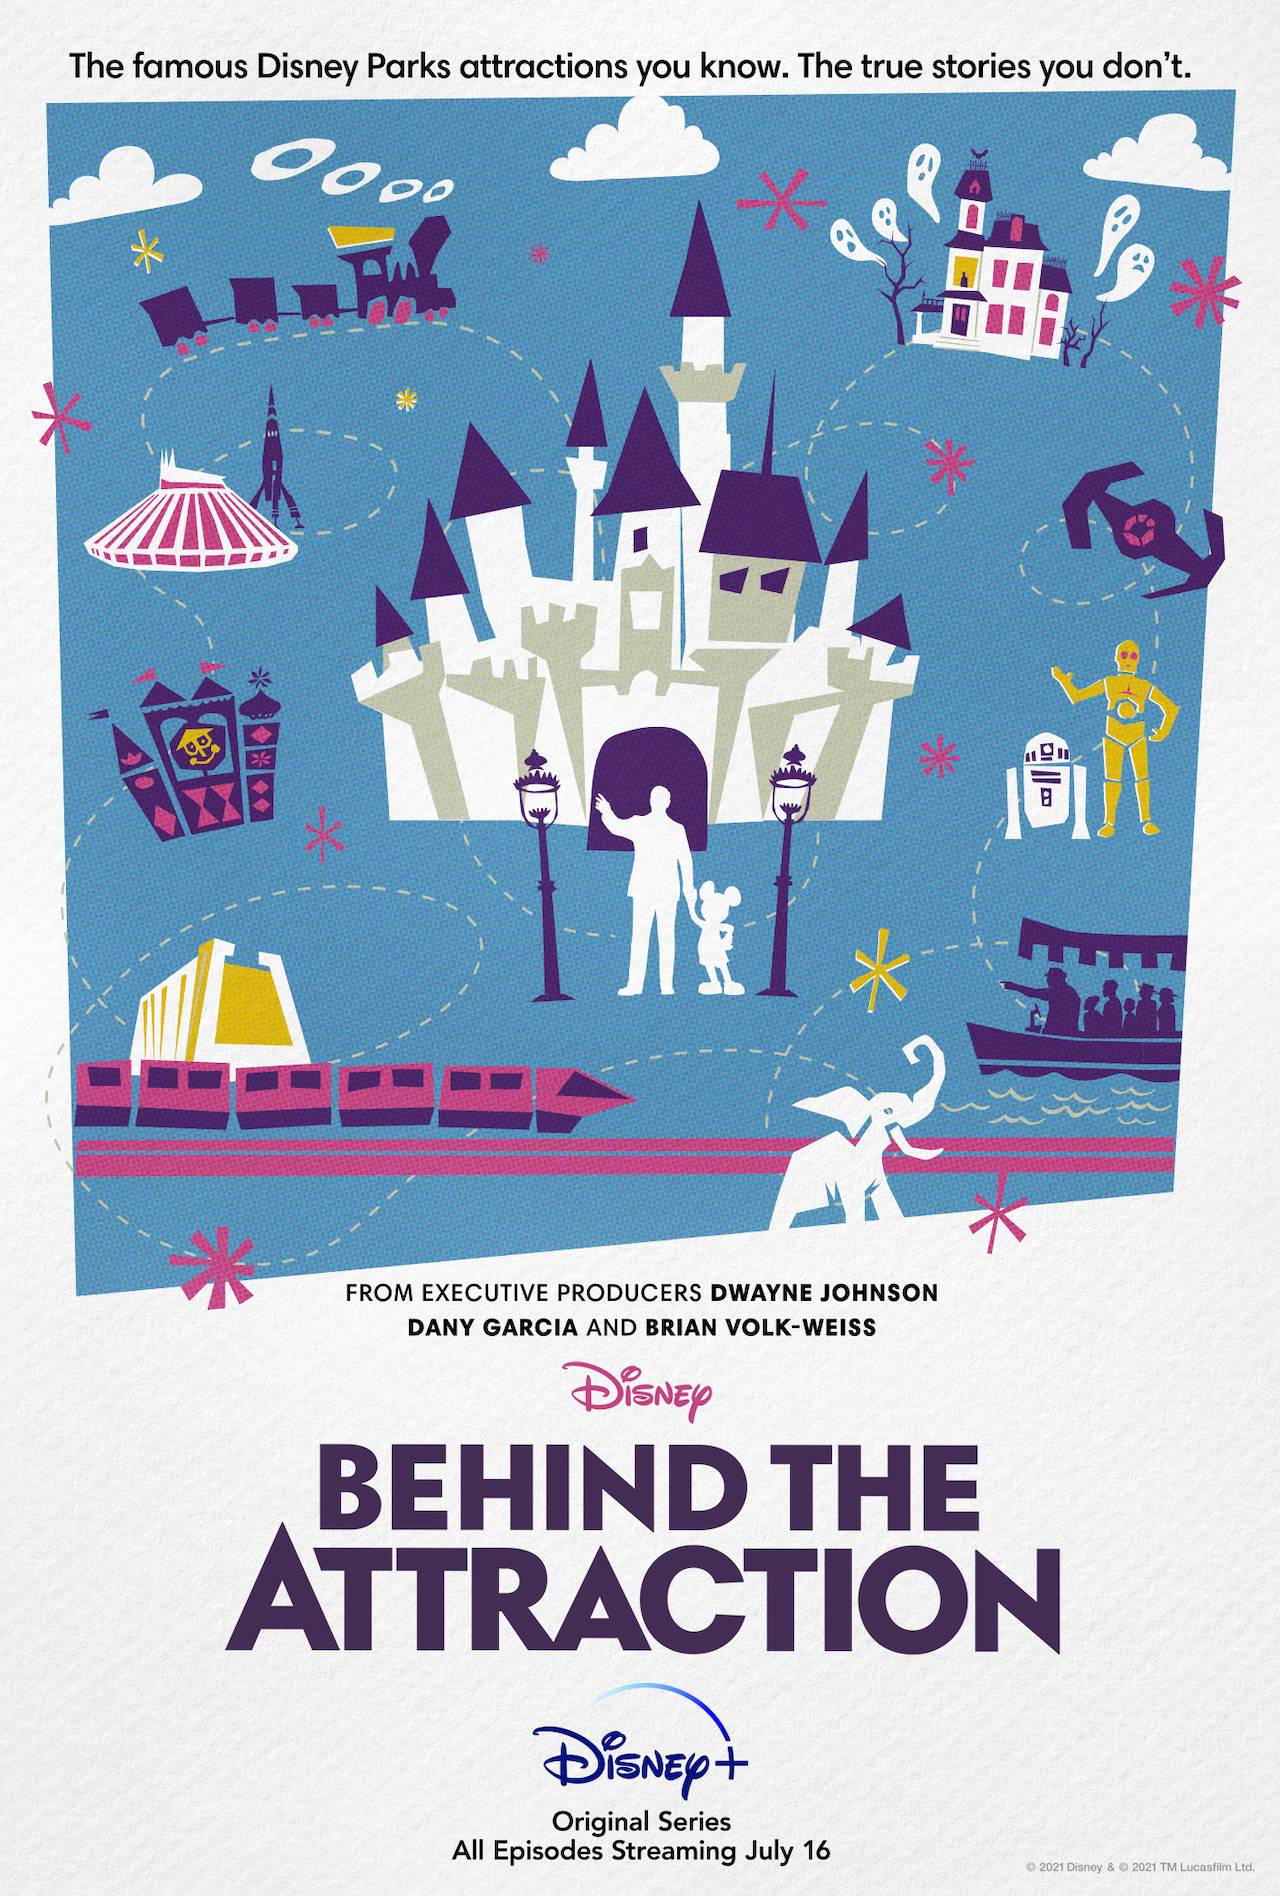 New trailer for Disney+ Original Series 'Behind The Attraction'